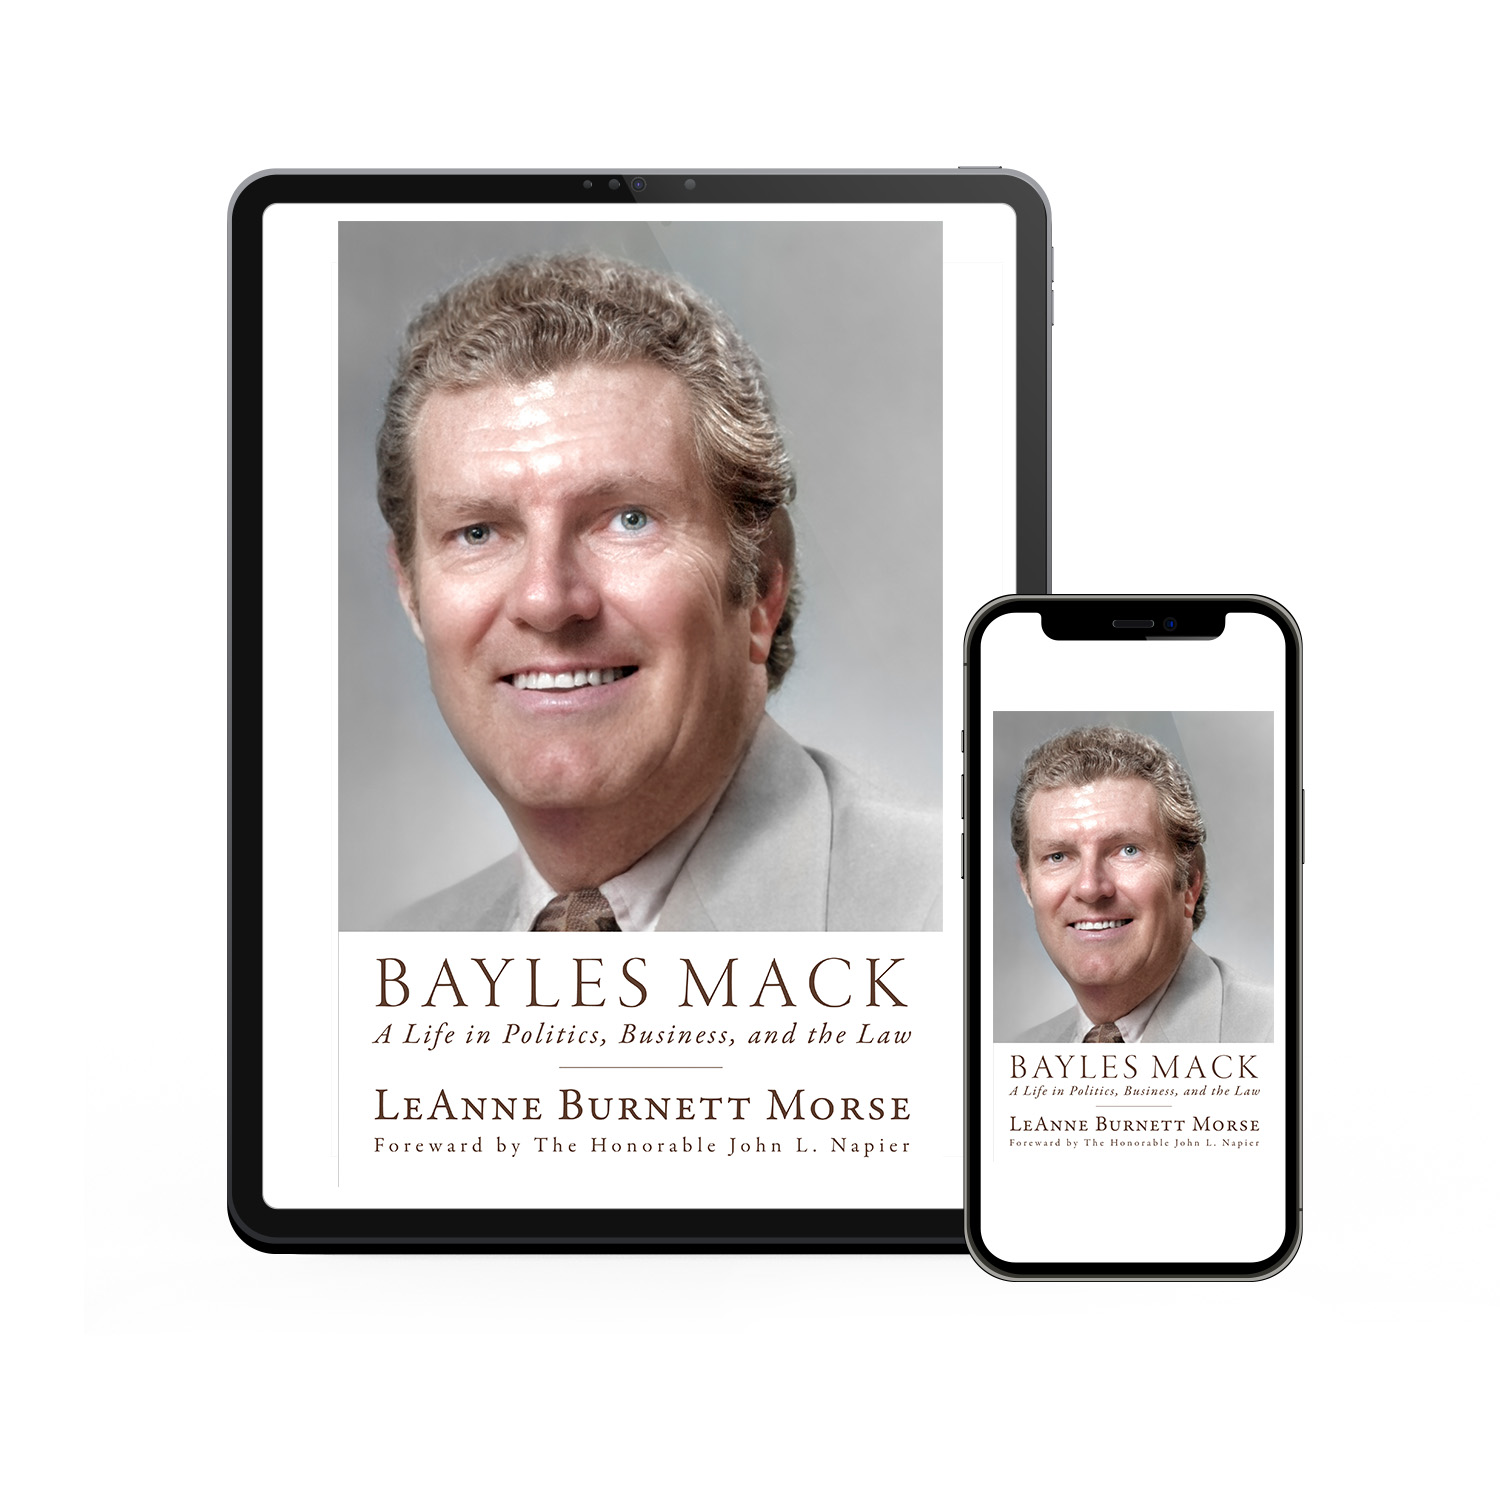 'Bayles Mack: A Life in Politics, Business and the Law' is a non-fiction biography of this prominent American lawmaker and lawyer. The author is LeAnne Burnett Morse. The cover design and interior formatting are by Mark Thomas. To learn more about what Mark could do for your book, please visit coverness.com.